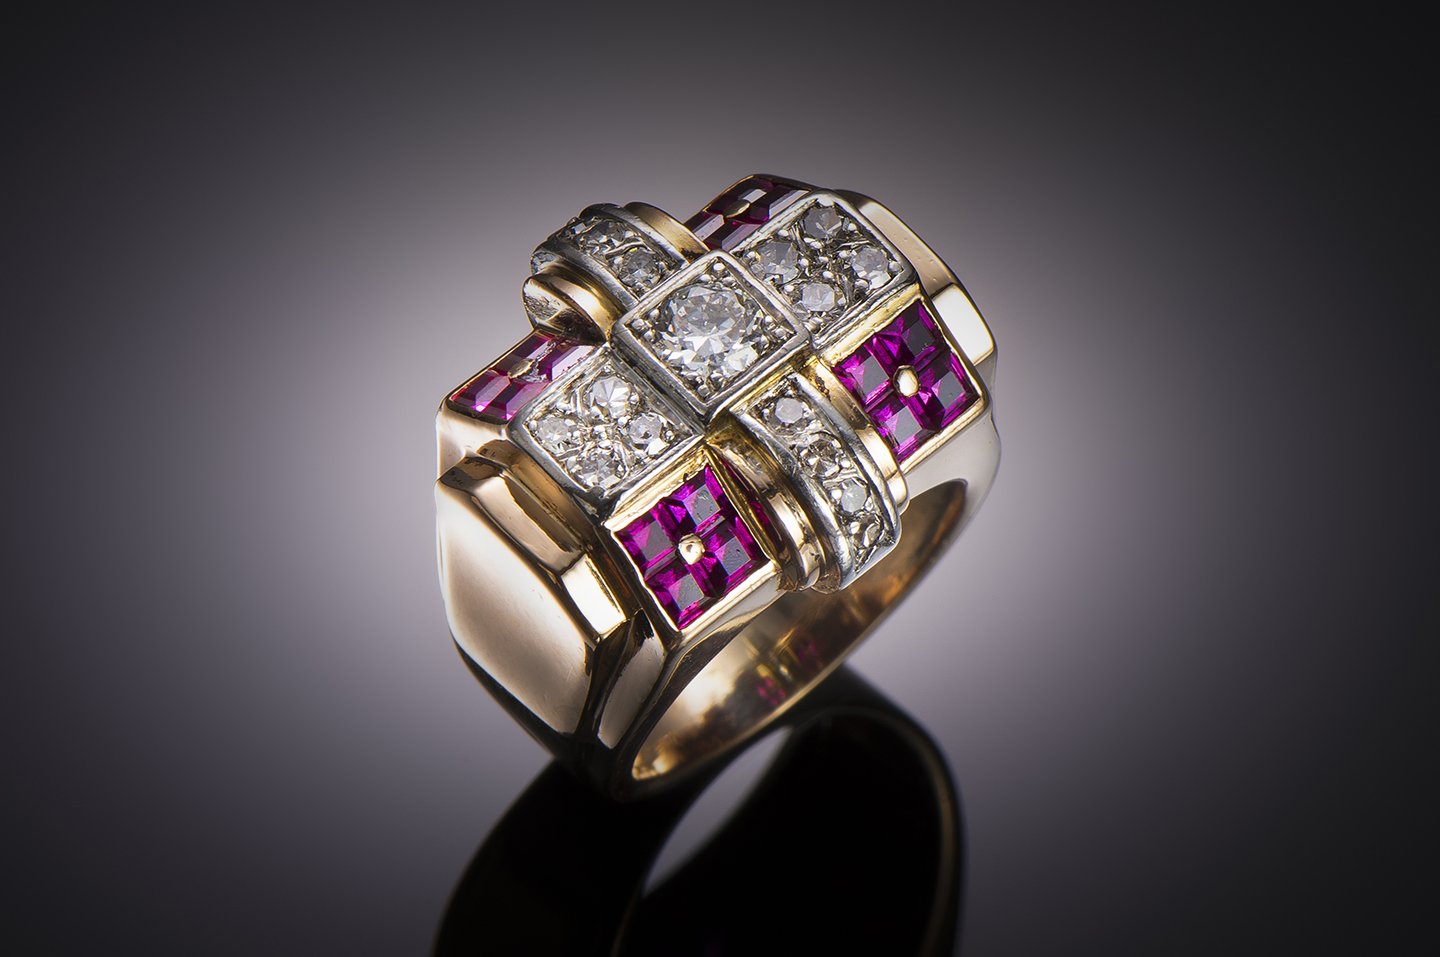 French diamond and ruby ring circa 1940-1